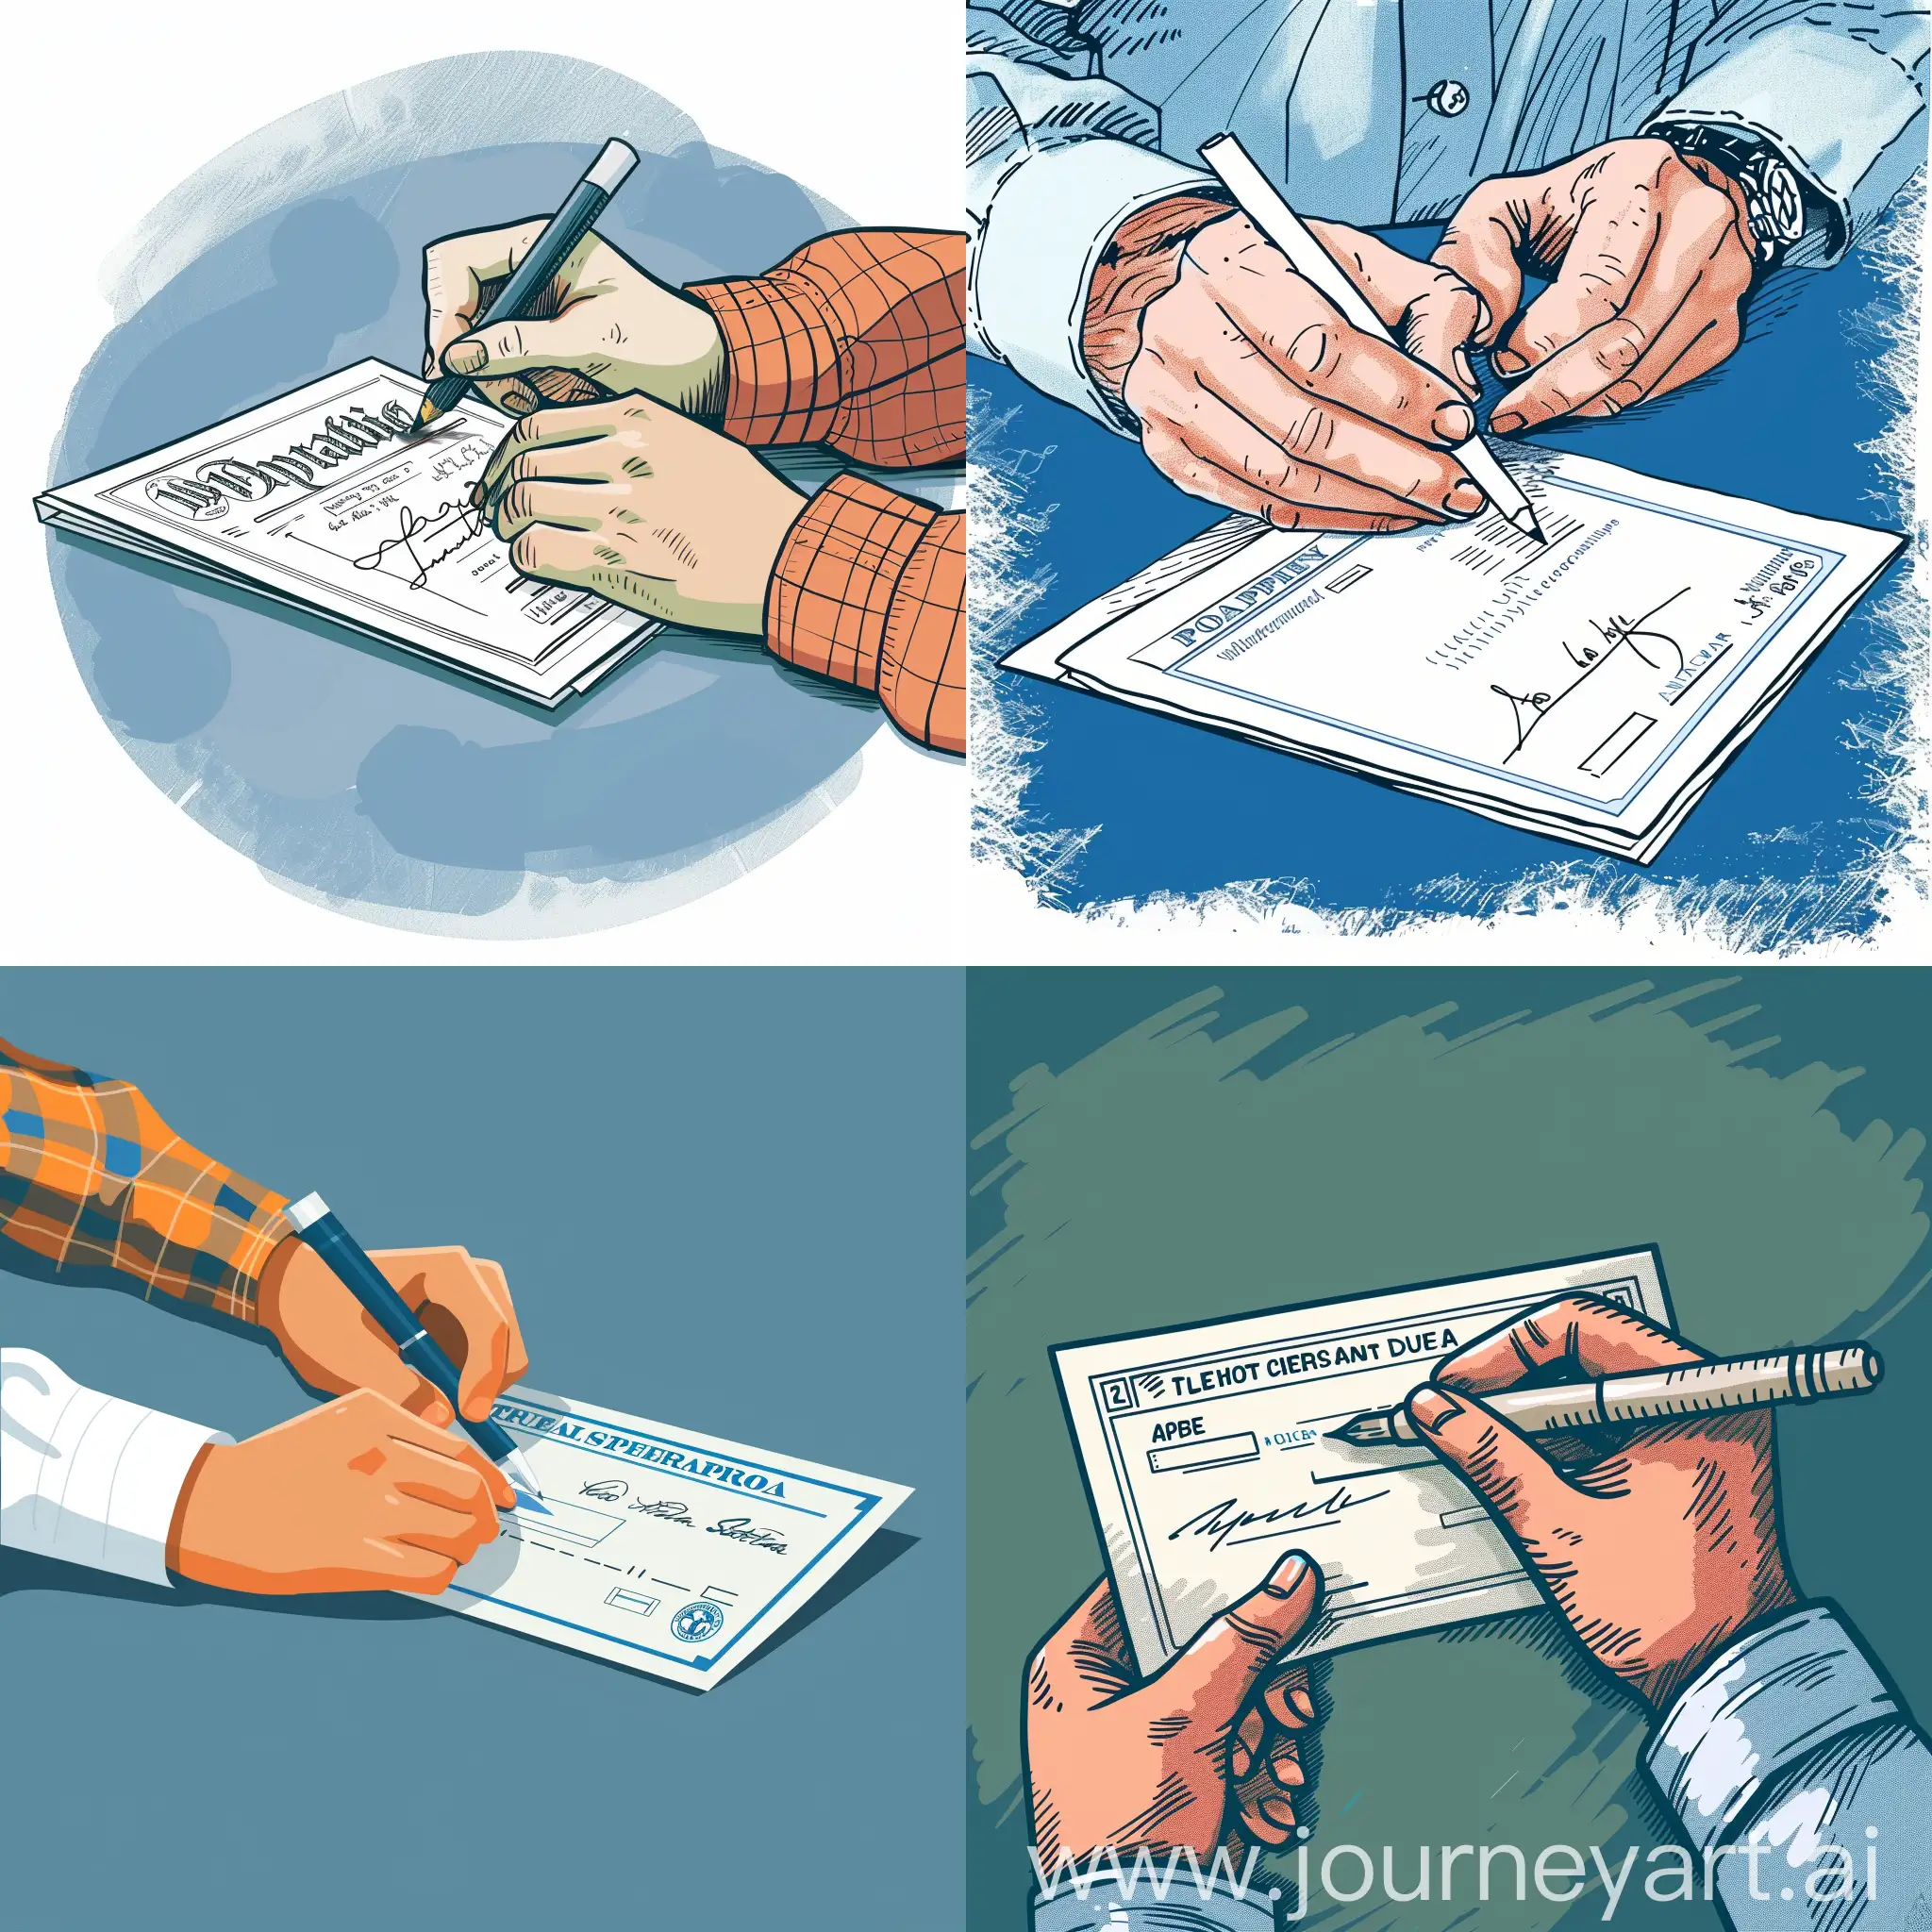 Person-Signing-Paycheck-in-Vibrant-Apple-Light-and-Dark-Blue-Tones